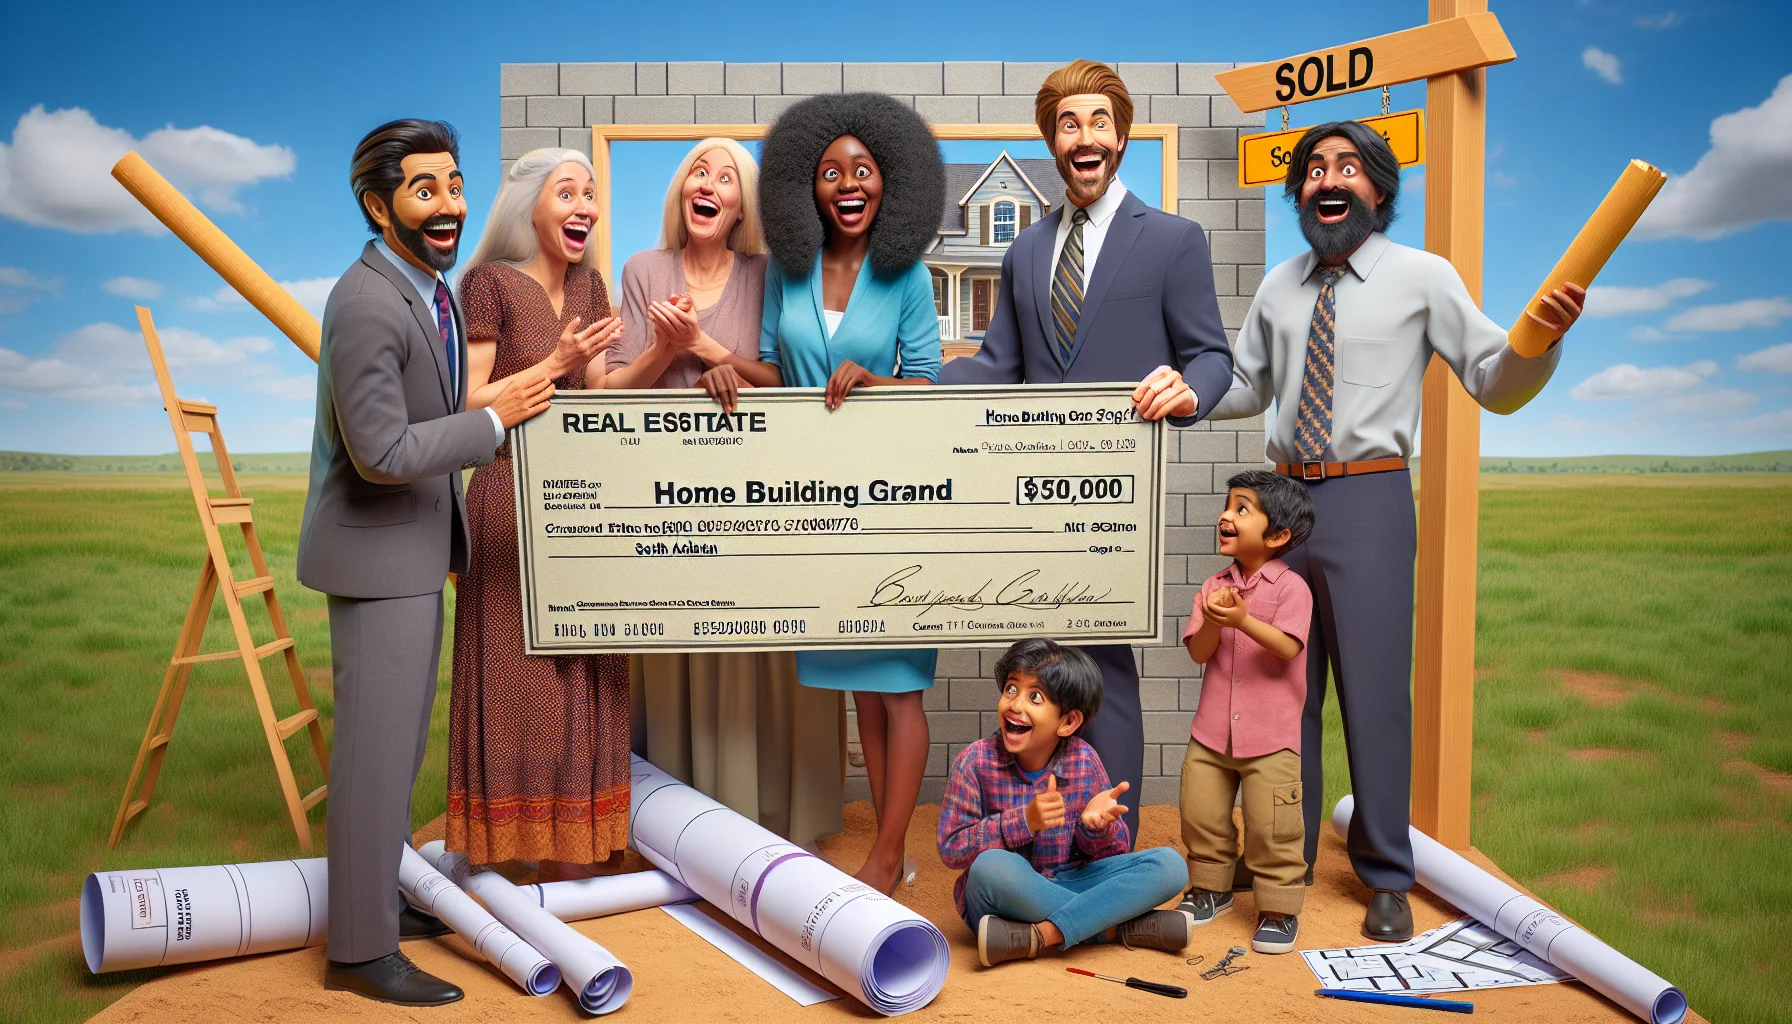 Imagine a humorous and realistic image where a Caucasian male and Black female real estate agent are comically handing over a massive check, the kind you often see in lottery wins, to a South Asian family of a man, woman, and two children. The check is labeled 'Home Building Grant'. There are blueprints and measuring tapes scattered about the scene. The backdrop is an open, grassy plot with a 'Sold' signpost. The family looks thrilled and a bit surprised, maybe because of the size of the check or because of the smiling agents' exaggerated enthusiasm.